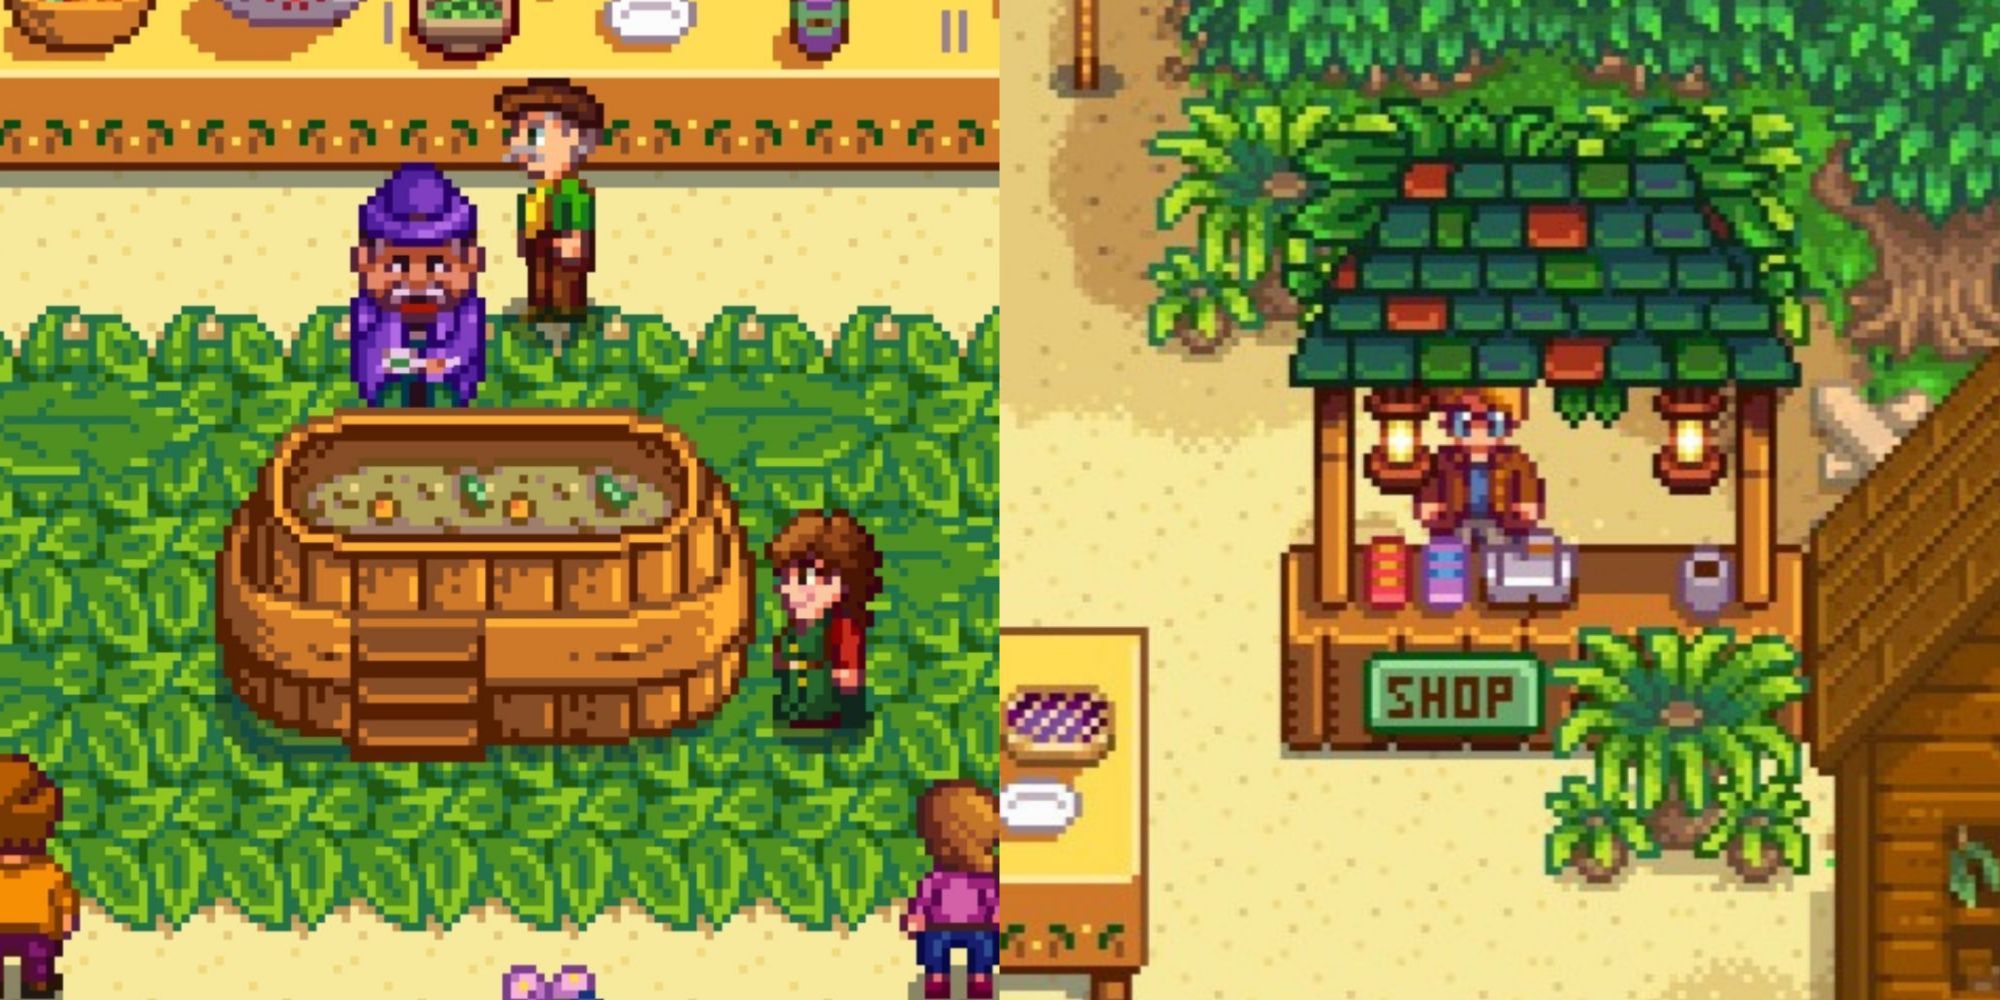 Split image screenshots of the Mayor and Marnie at the Luau and Pierre's shop at the Luau in Stardew Valley.